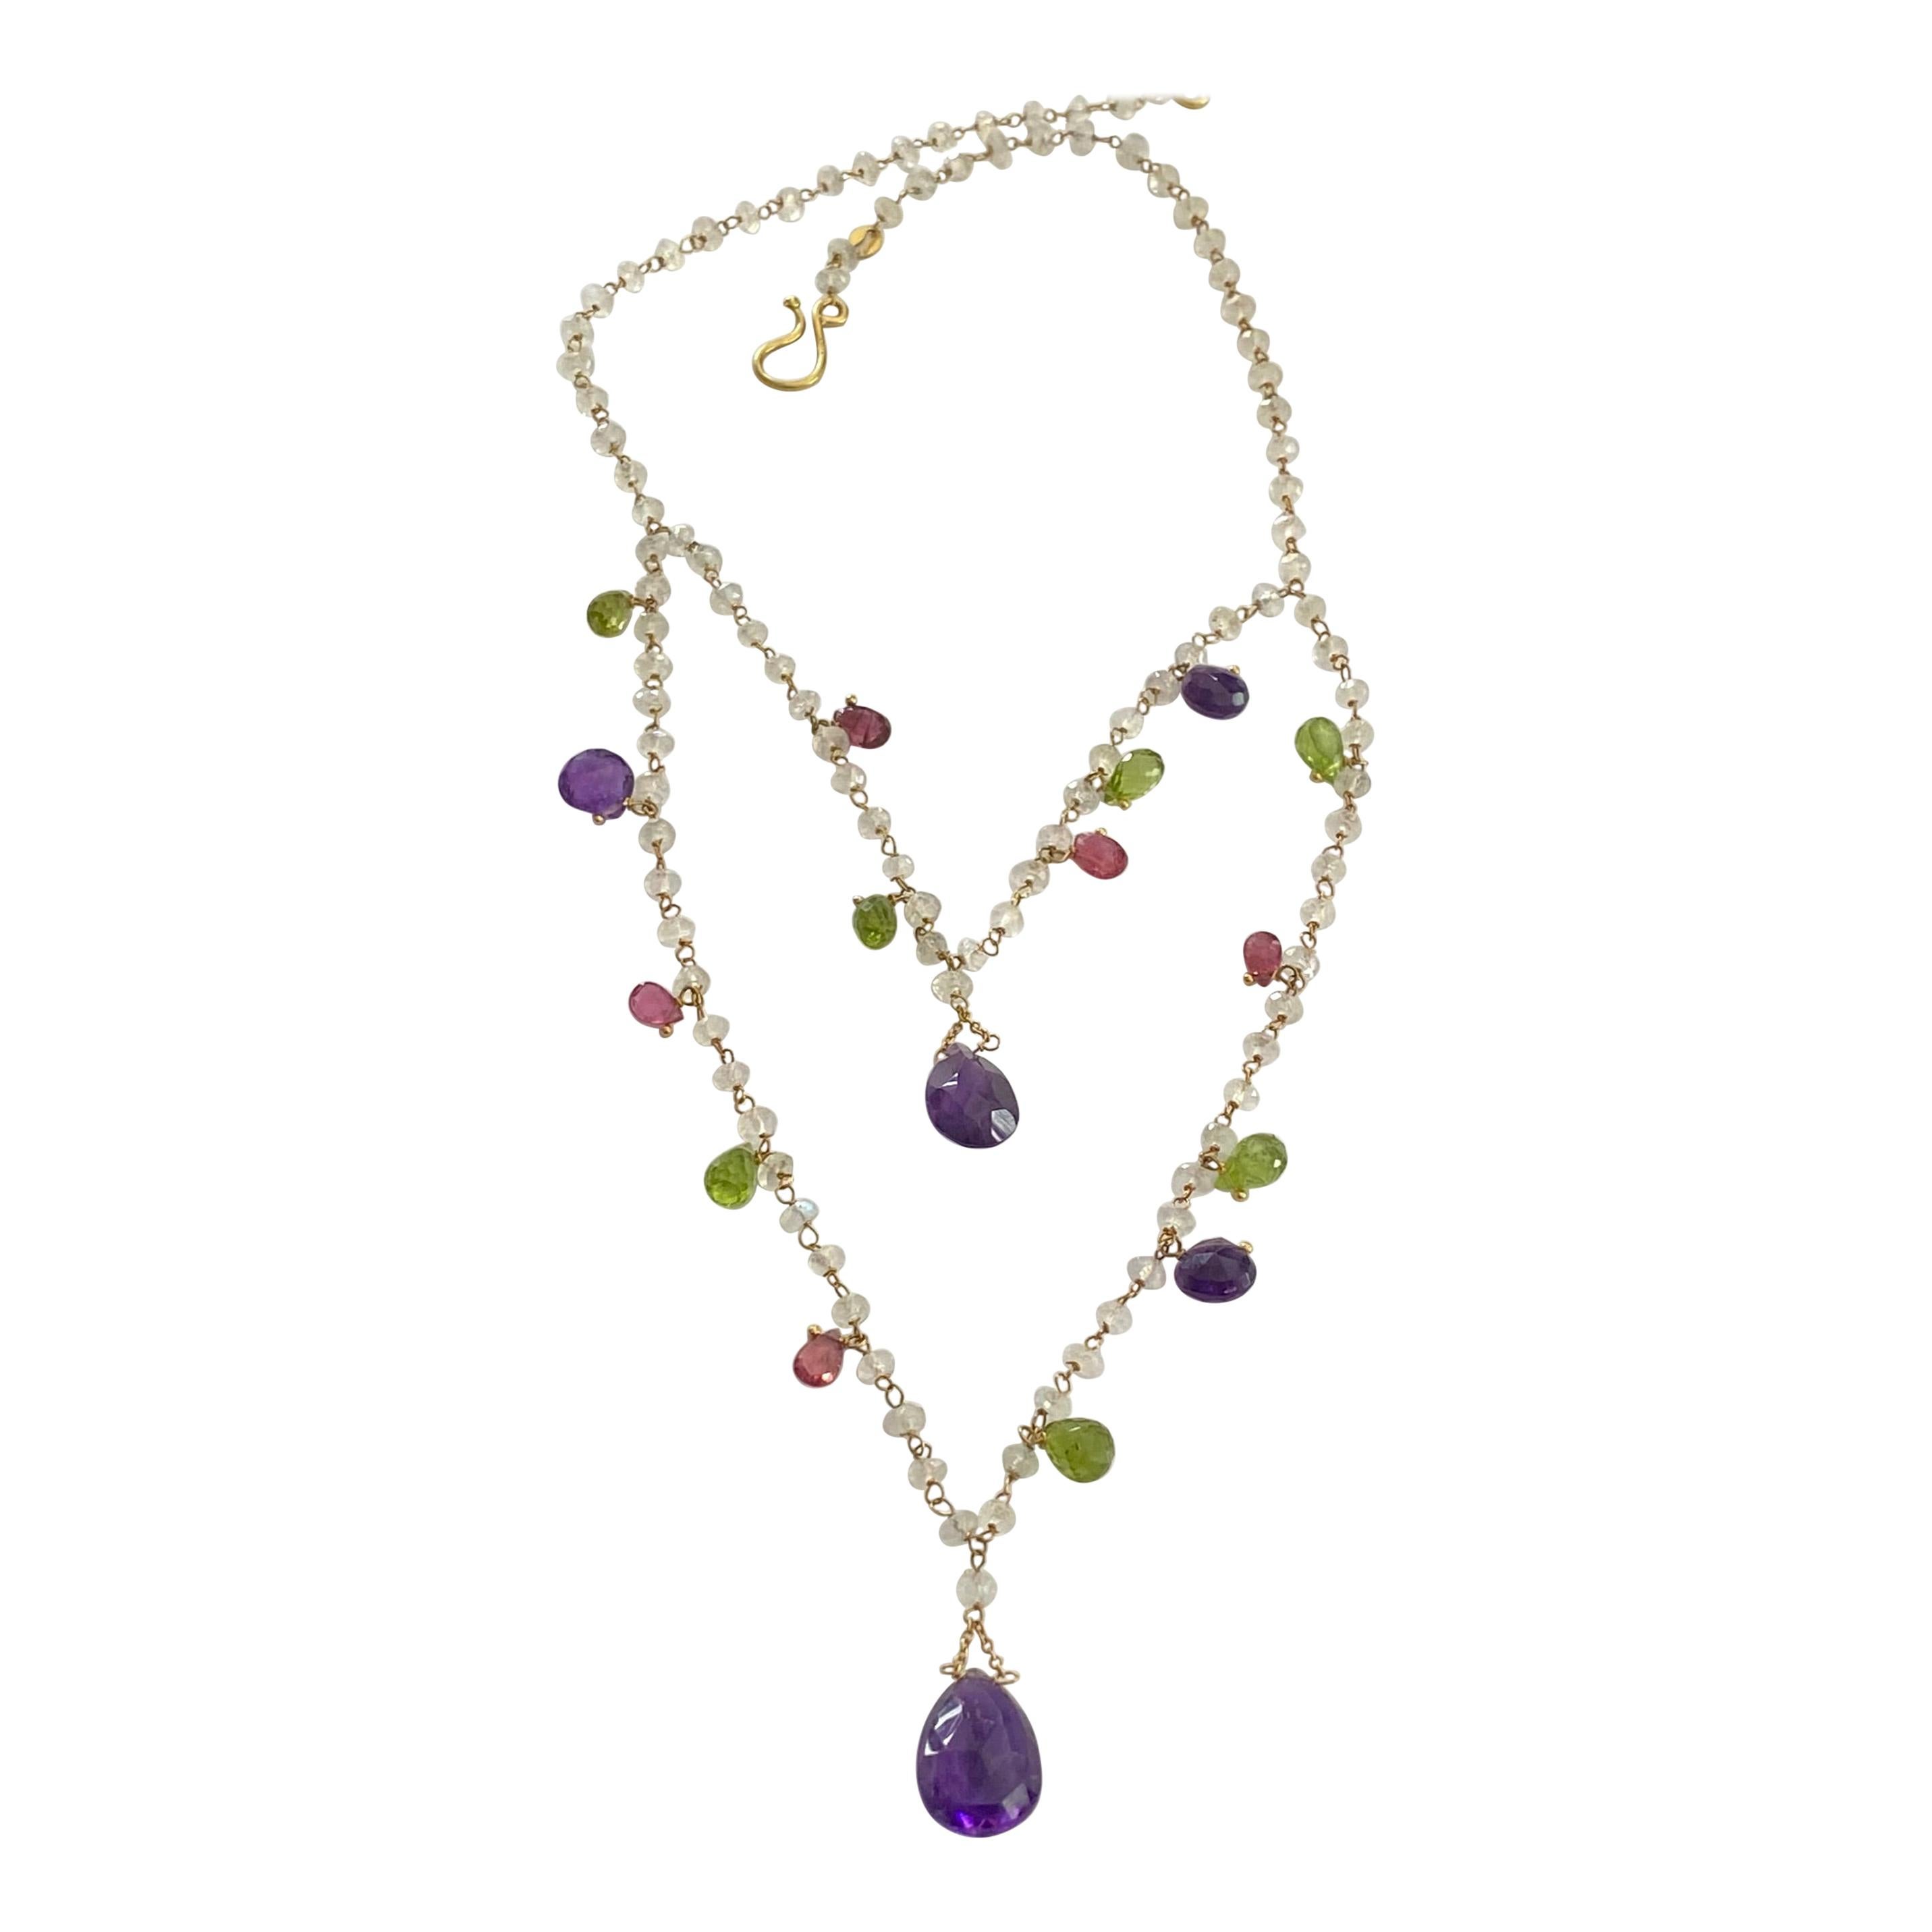 Handmade Necklace, Made of Amethysts, Peridots, Rubelite and Moonstones, Gold